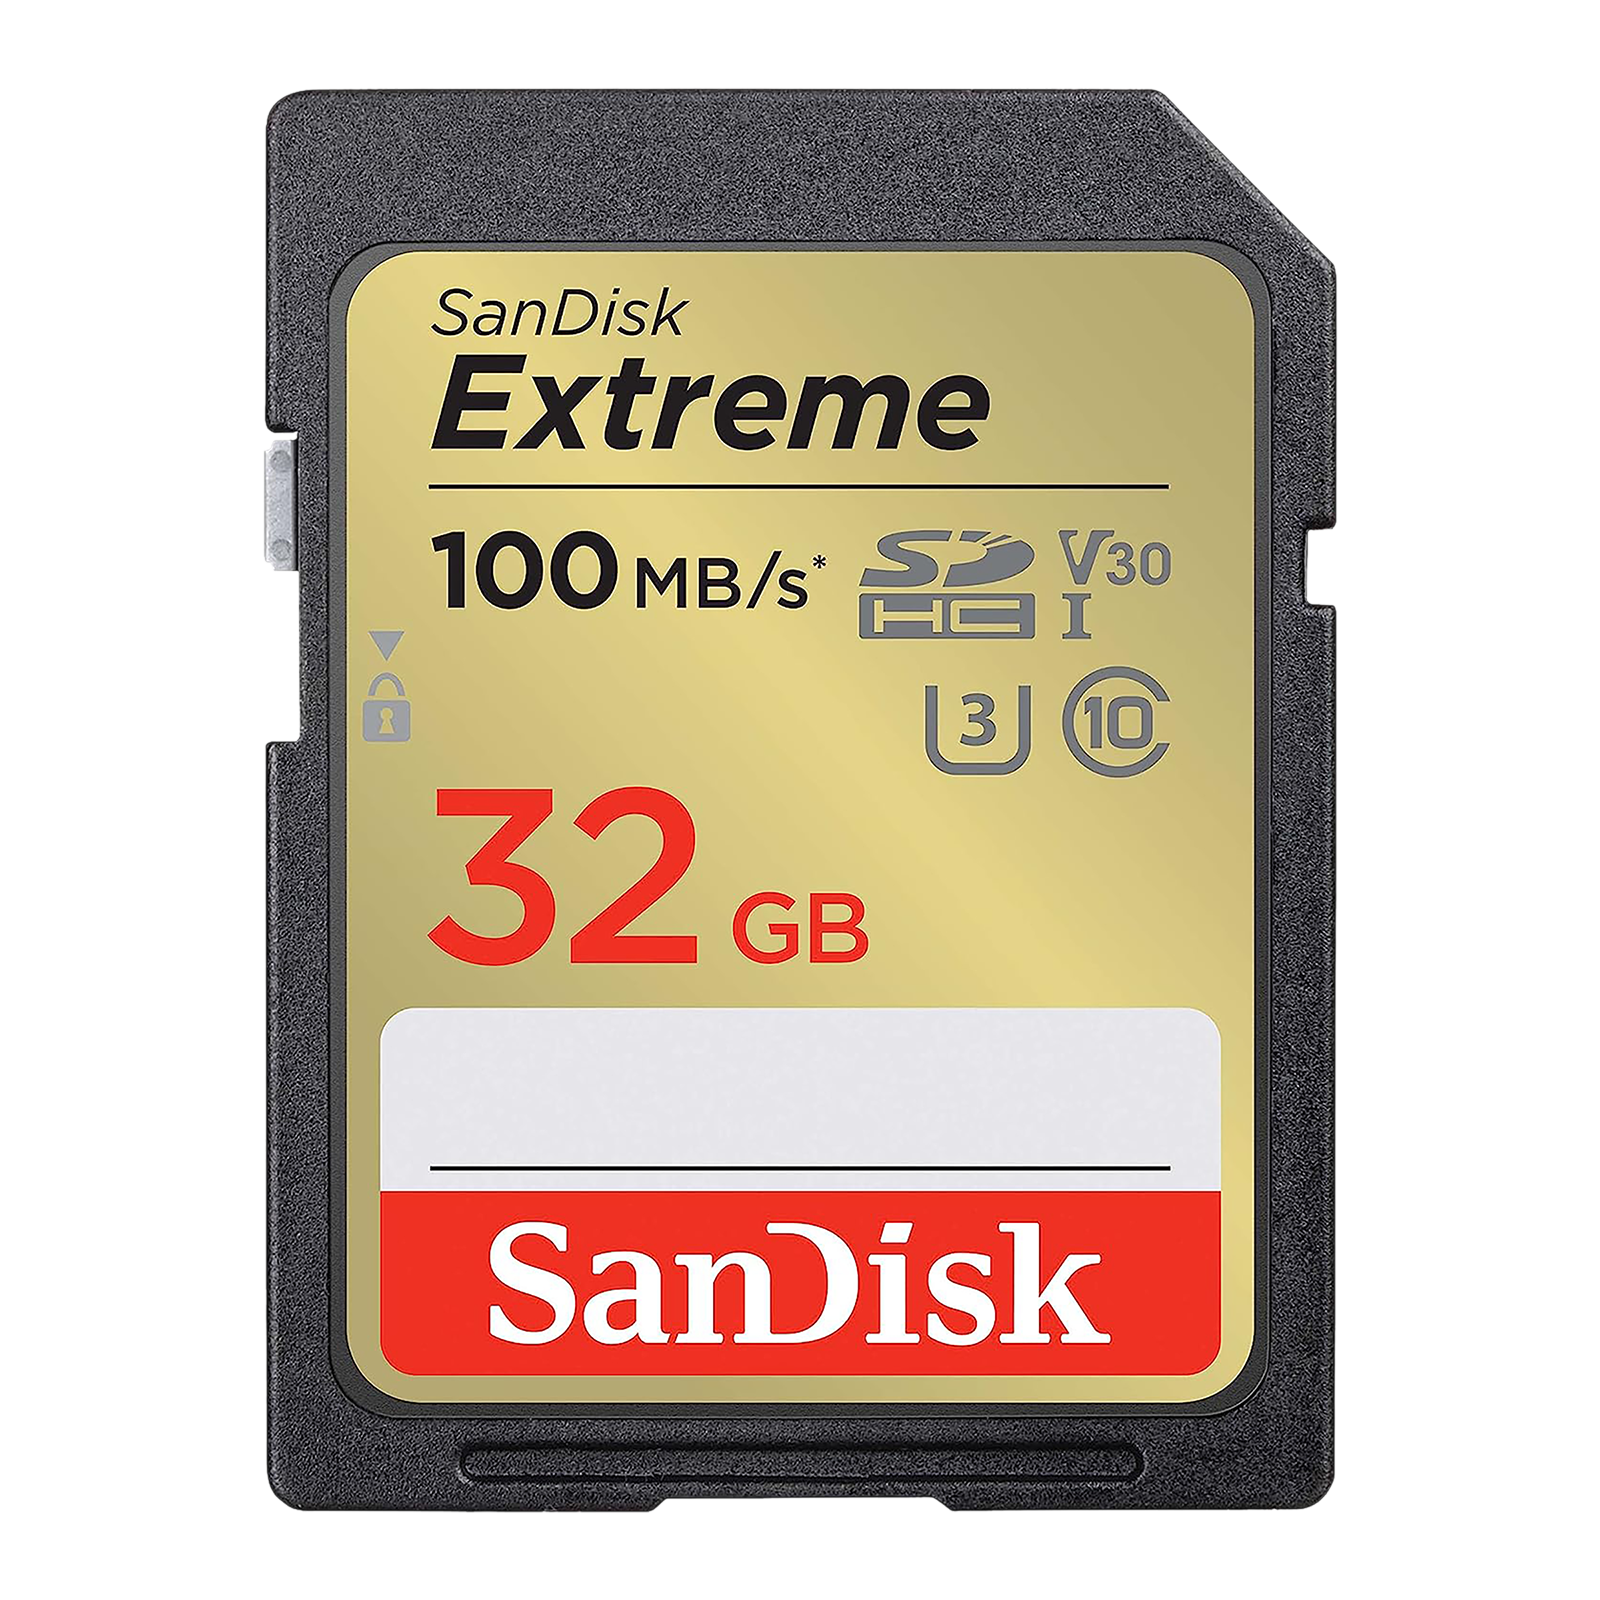 SanDisk Extreme SDHC 32GB Class 10 100MB/s Memory Card